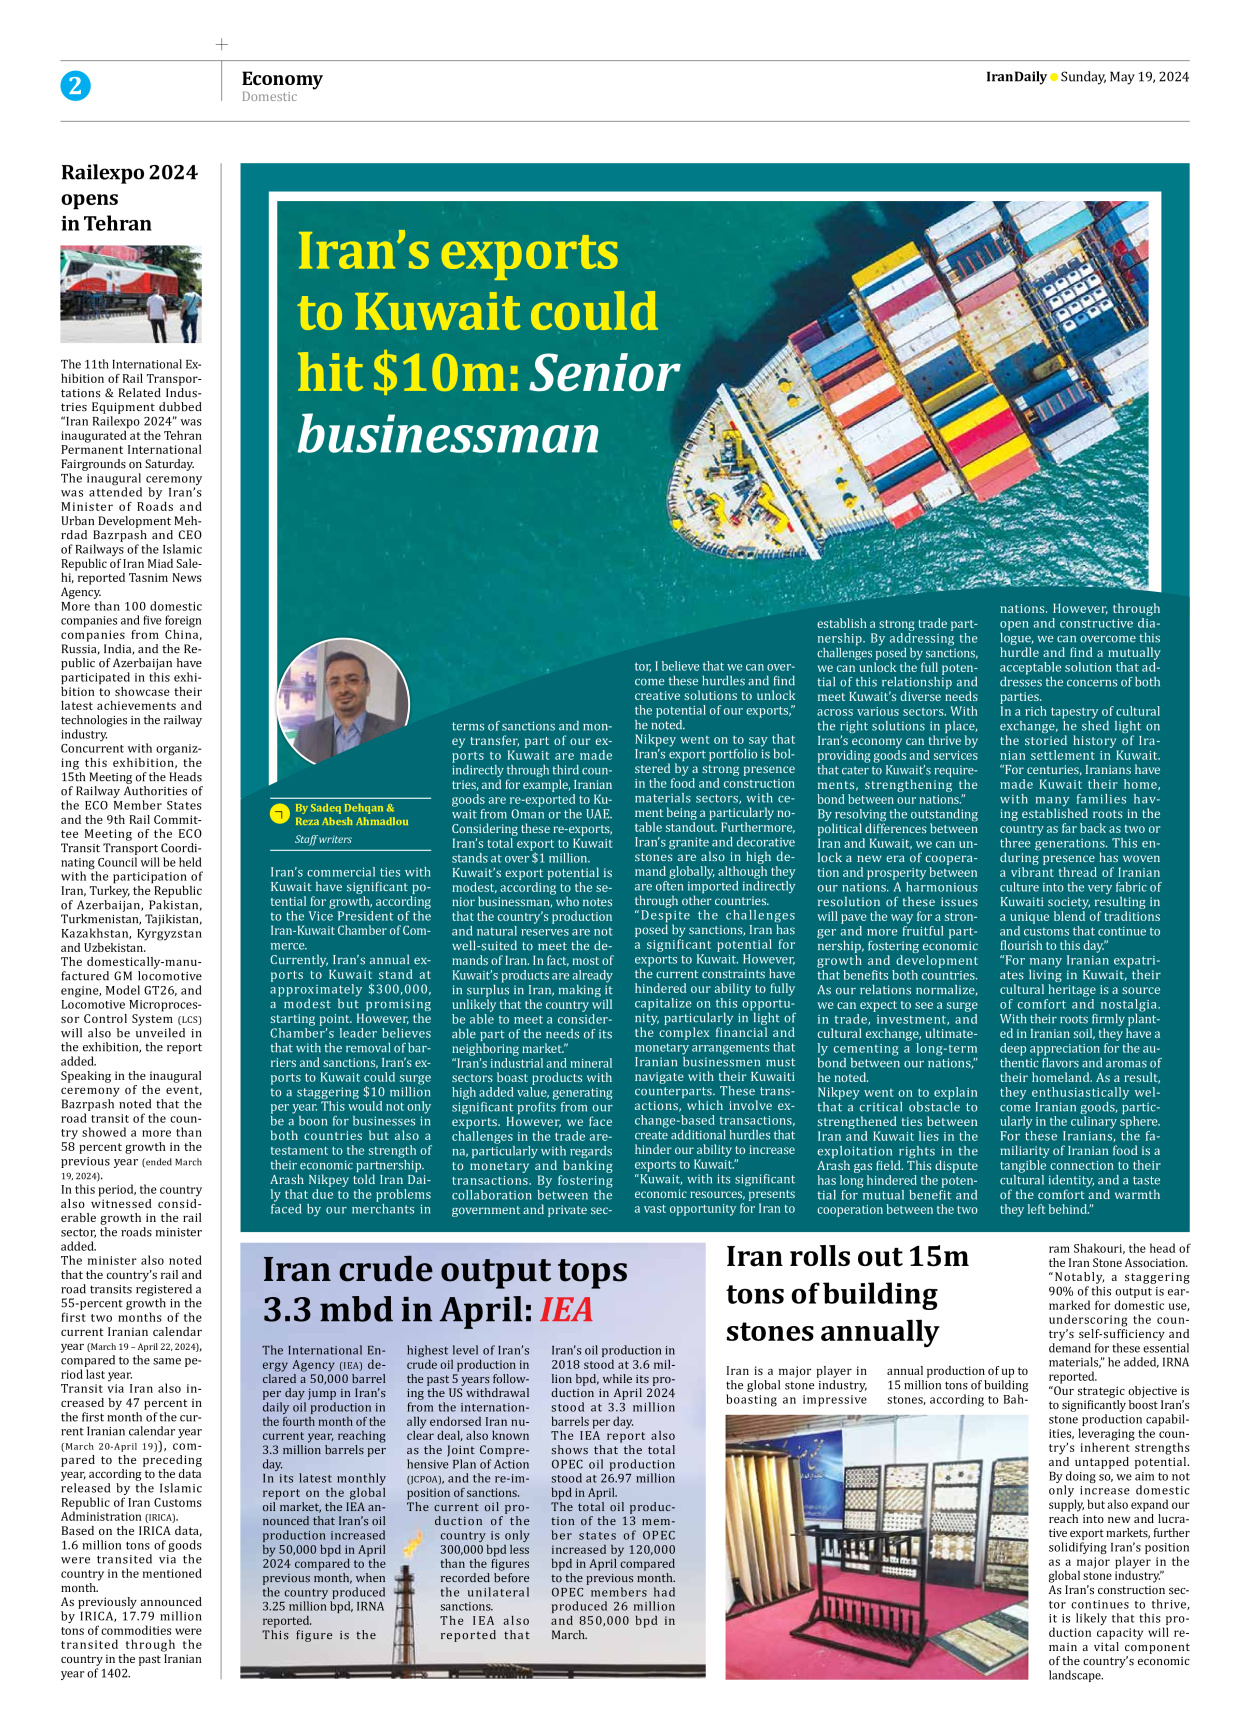 Iran Daily - Number Seven Thousand Five Hundred and Sixty One - 19 May 2024 - Page 2